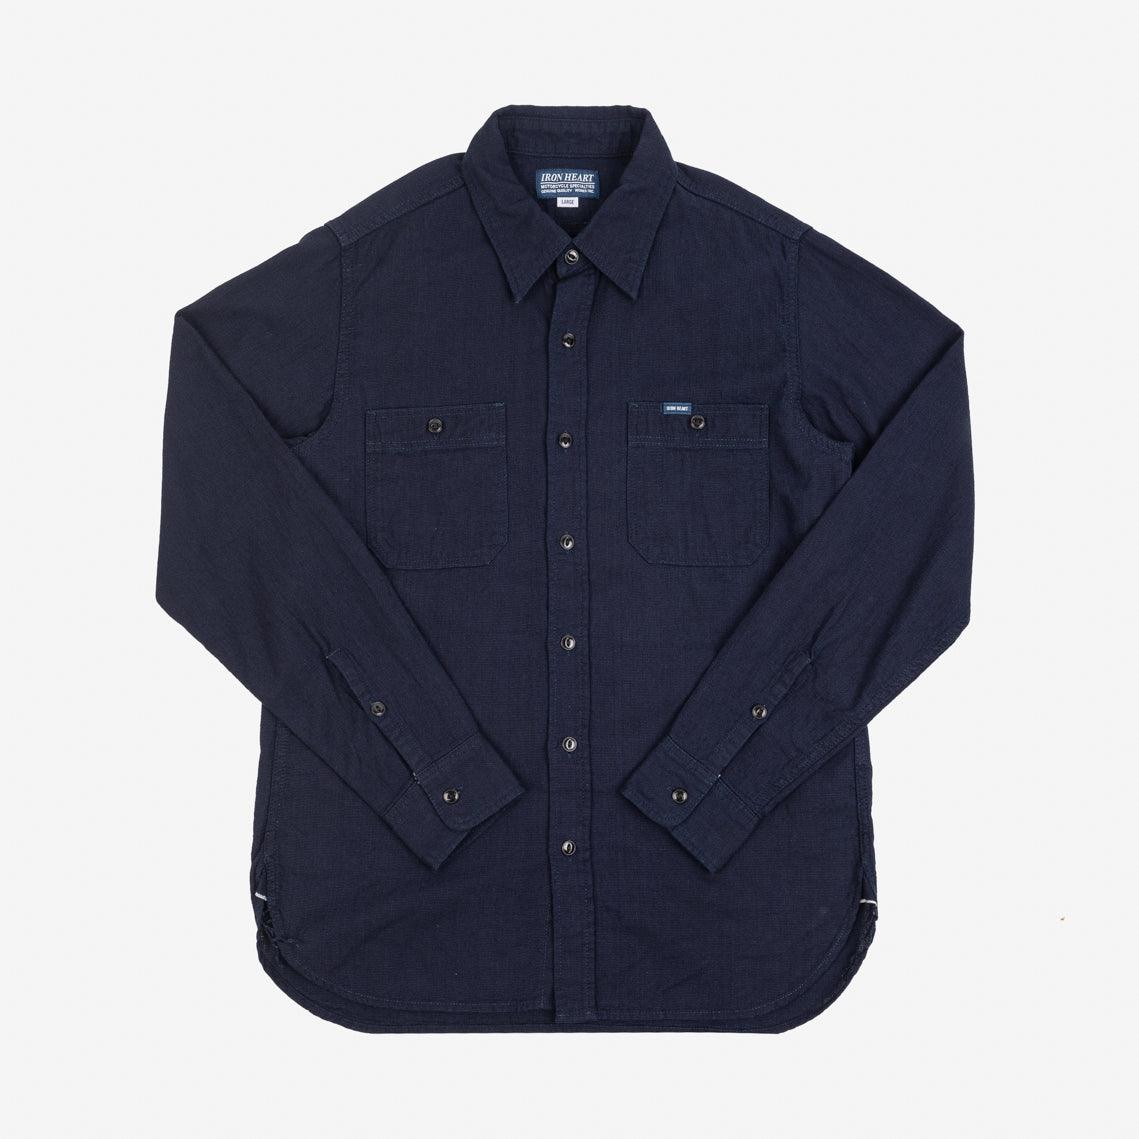 Image showing the IHSH-358-IND - 5oz Dobby Cloth Work Shirt - Indigo which is a Shirts described by the following info Bargain, Iron Heart, Released, Shirts, Tops and sold on the IRON HEART GERMANY online store